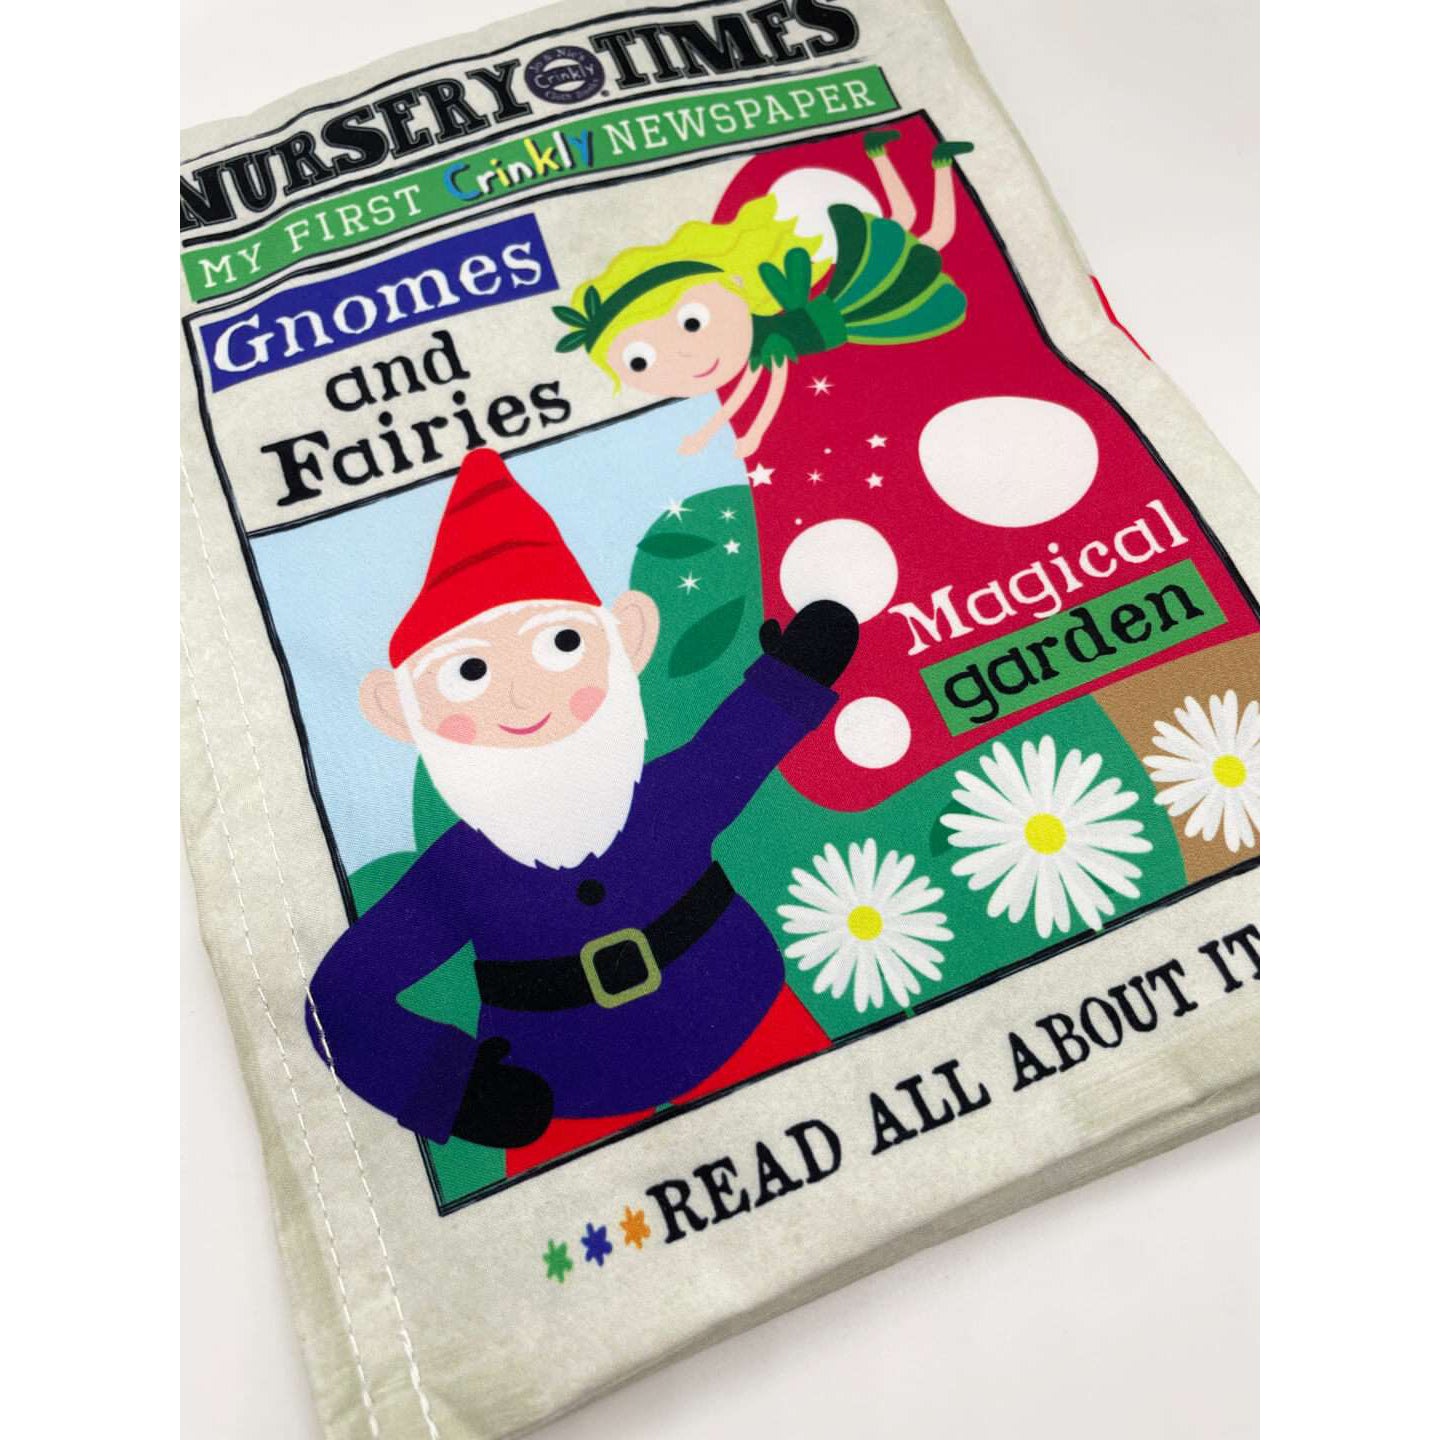 Crinkly Cloth Newspaper: Gnomes and Fairies